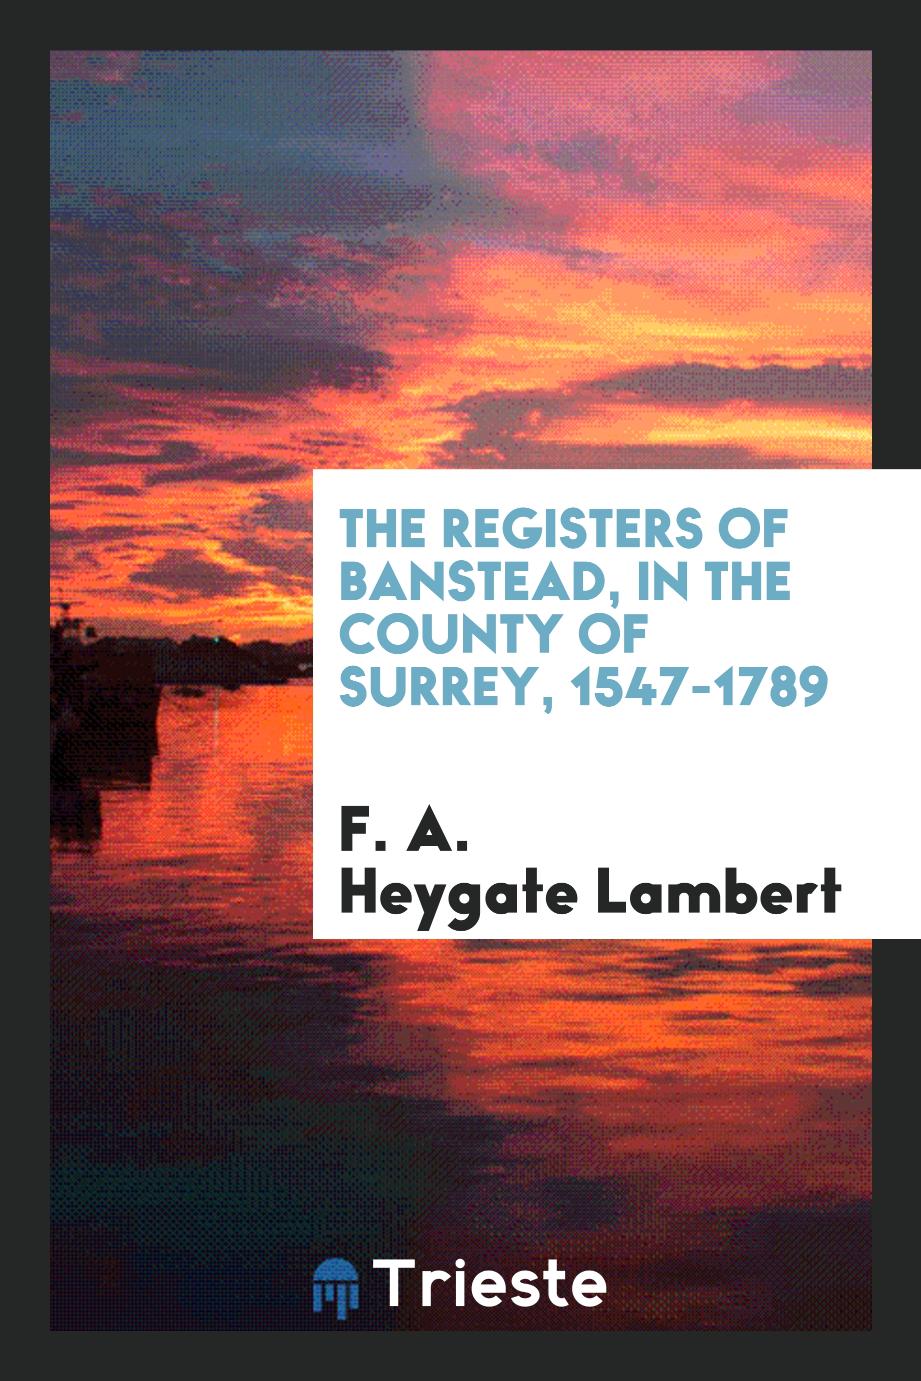 The Registers of Banstead, in the County of Surrey, 1547-1789